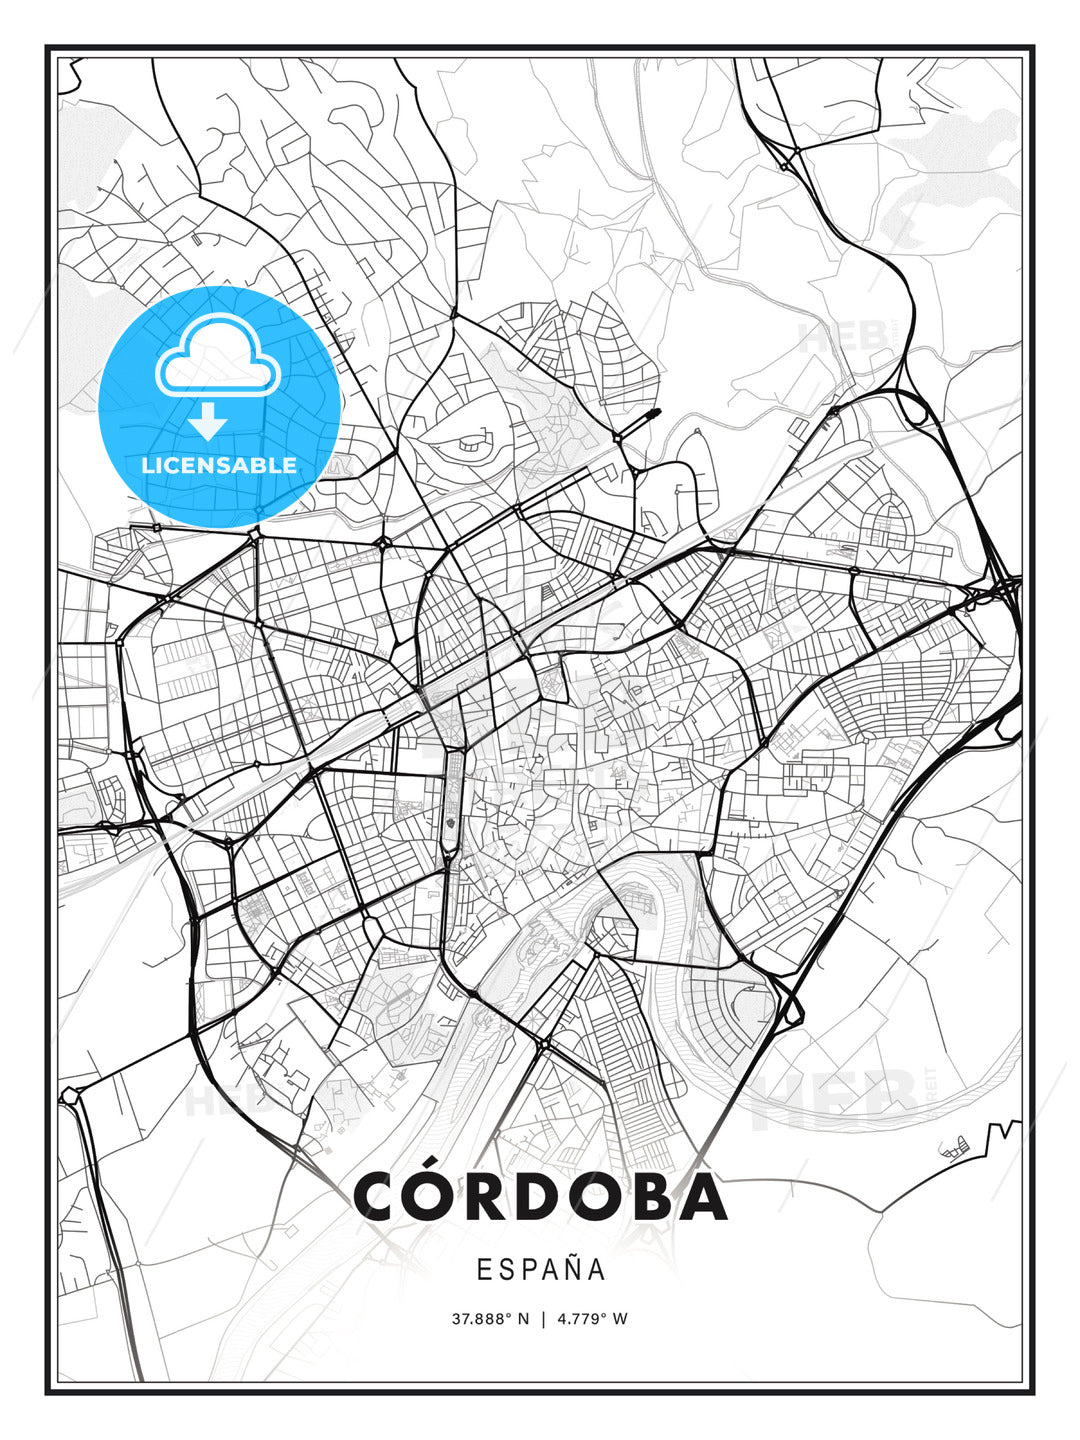 Córdoba, Spain, Modern Print Template in Various Formats - HEBSTREITS Sketches